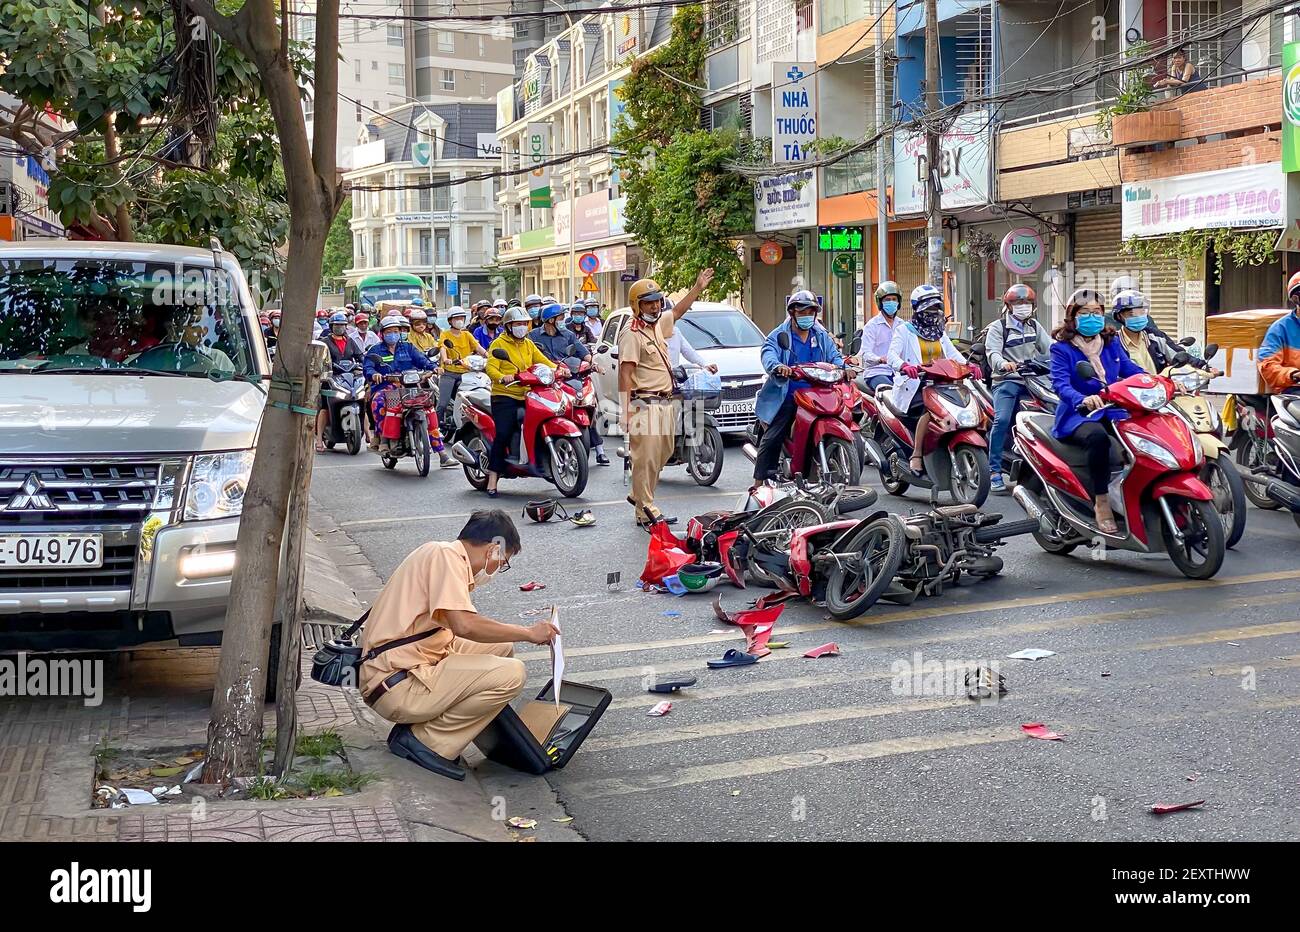 Pho Quang Street, Tan Binh District, Ho Chi Minh City, Vietnam - March 4, 2021: A traffic accident between two motorcycles, the police are handling th Stock Photo